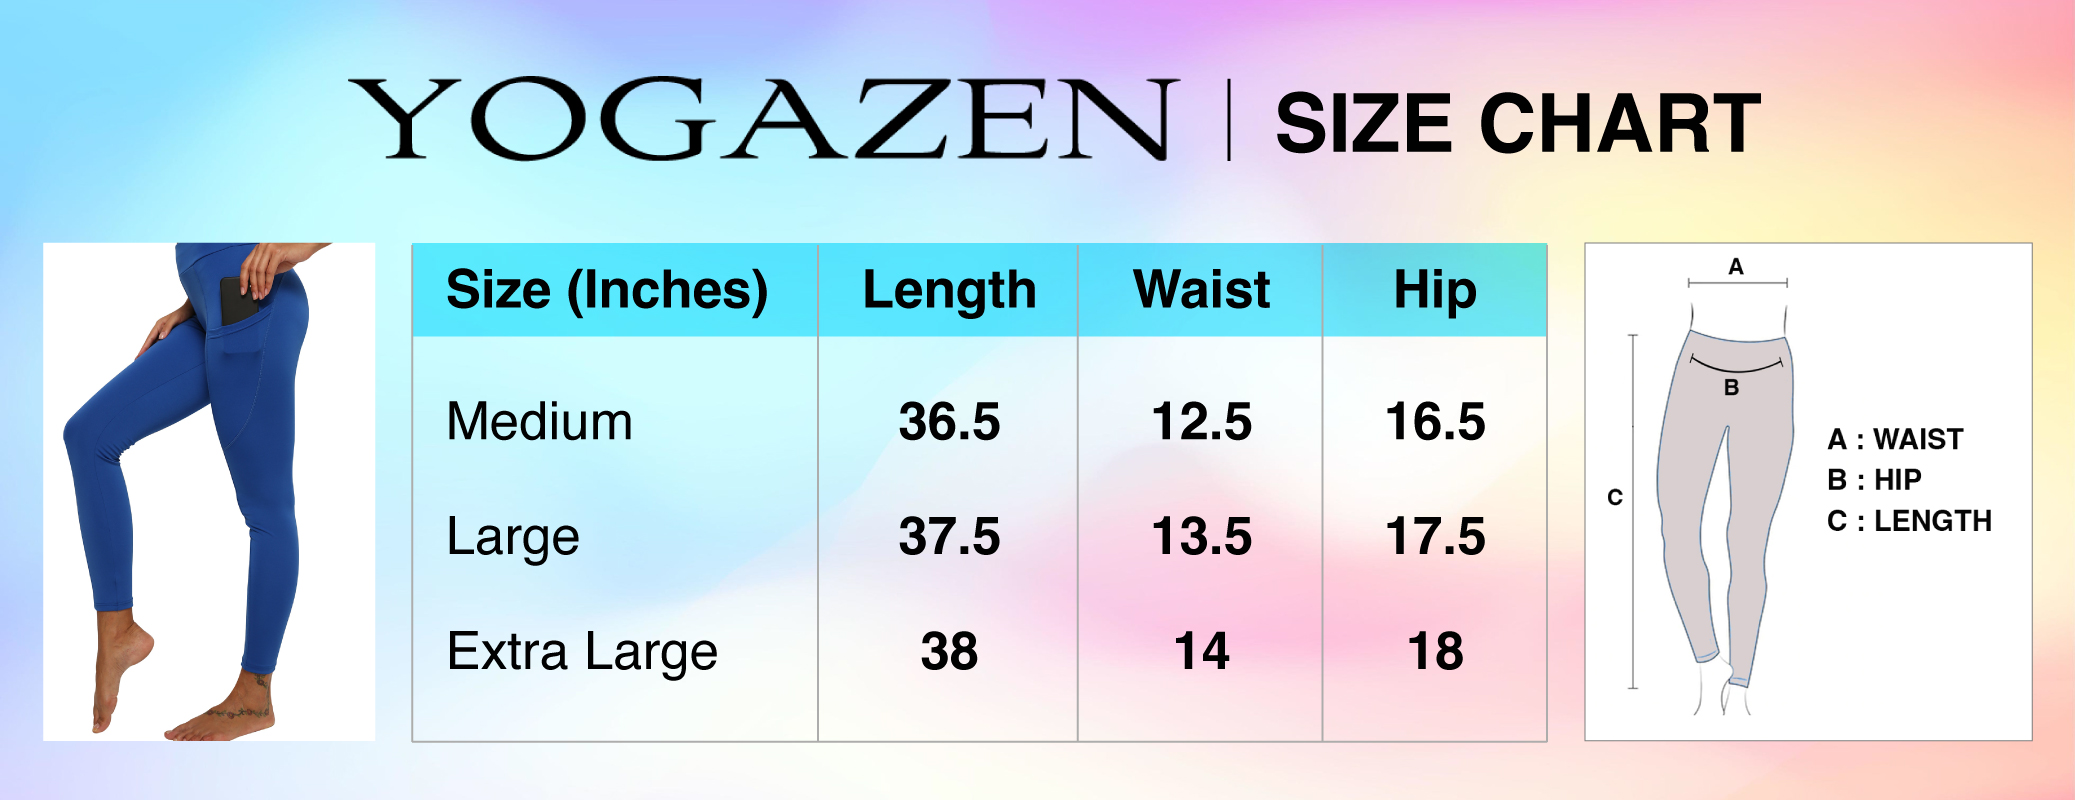 Women's Thick High Waist Yoga Exercise Stretch Stretch Pants Tummy Control Slimming Lifting Anti Cellulite Scrunch Booty Leggings Ruched Butt Seamless Tights with 2 Side Pockets Sport Workout - image 4 of 7